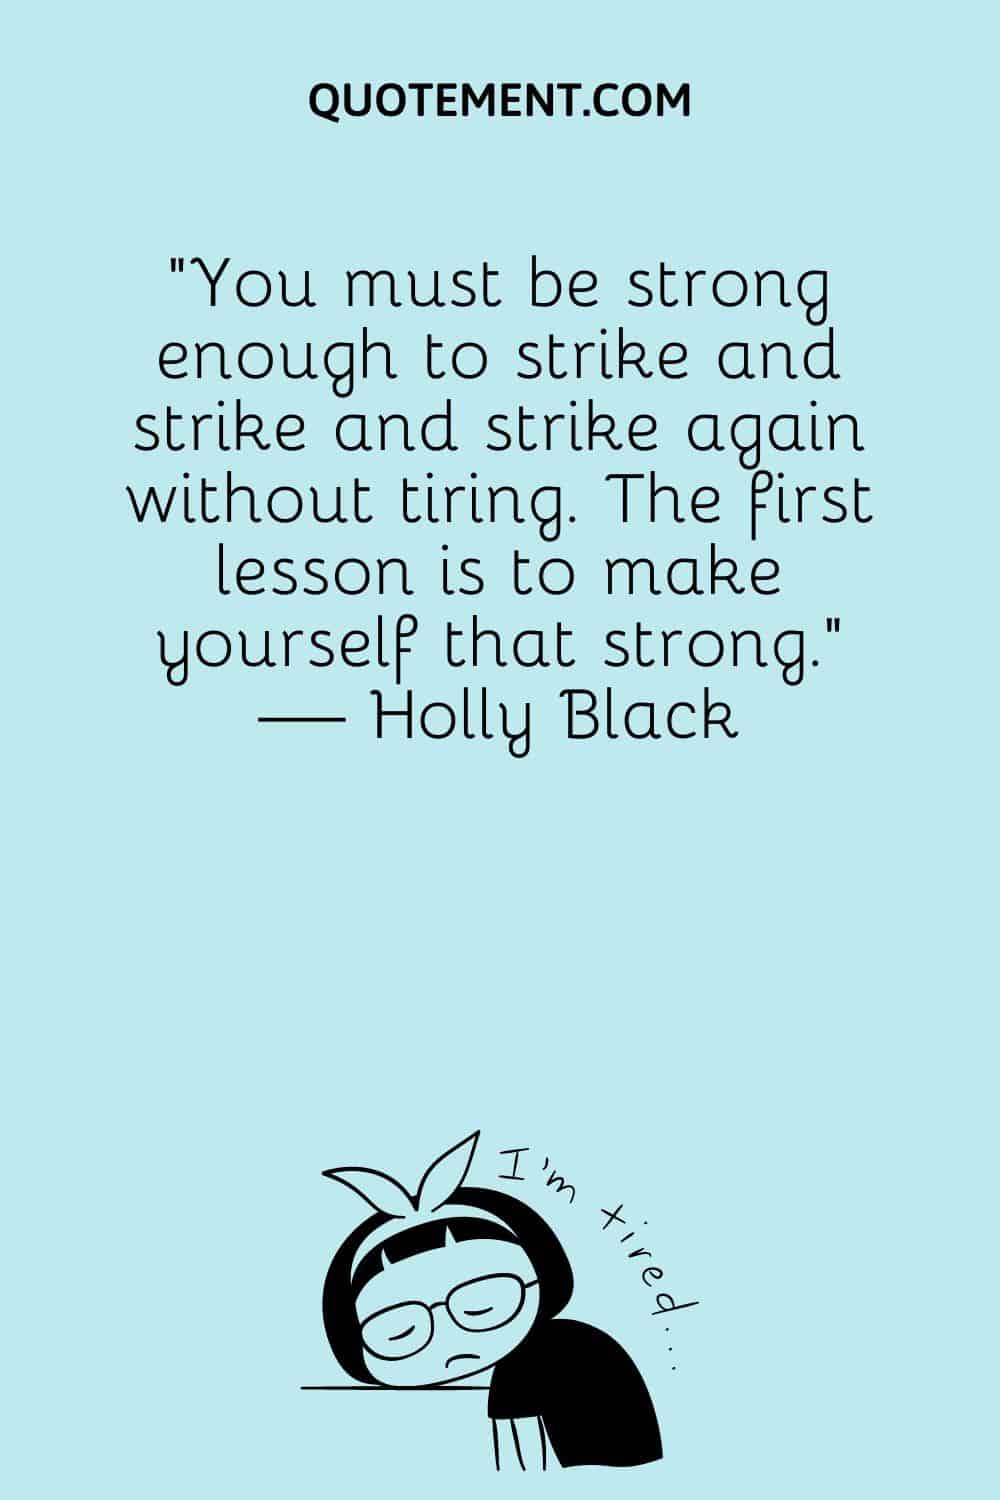 You must be strong enough to strike and strike and strike again without tiring